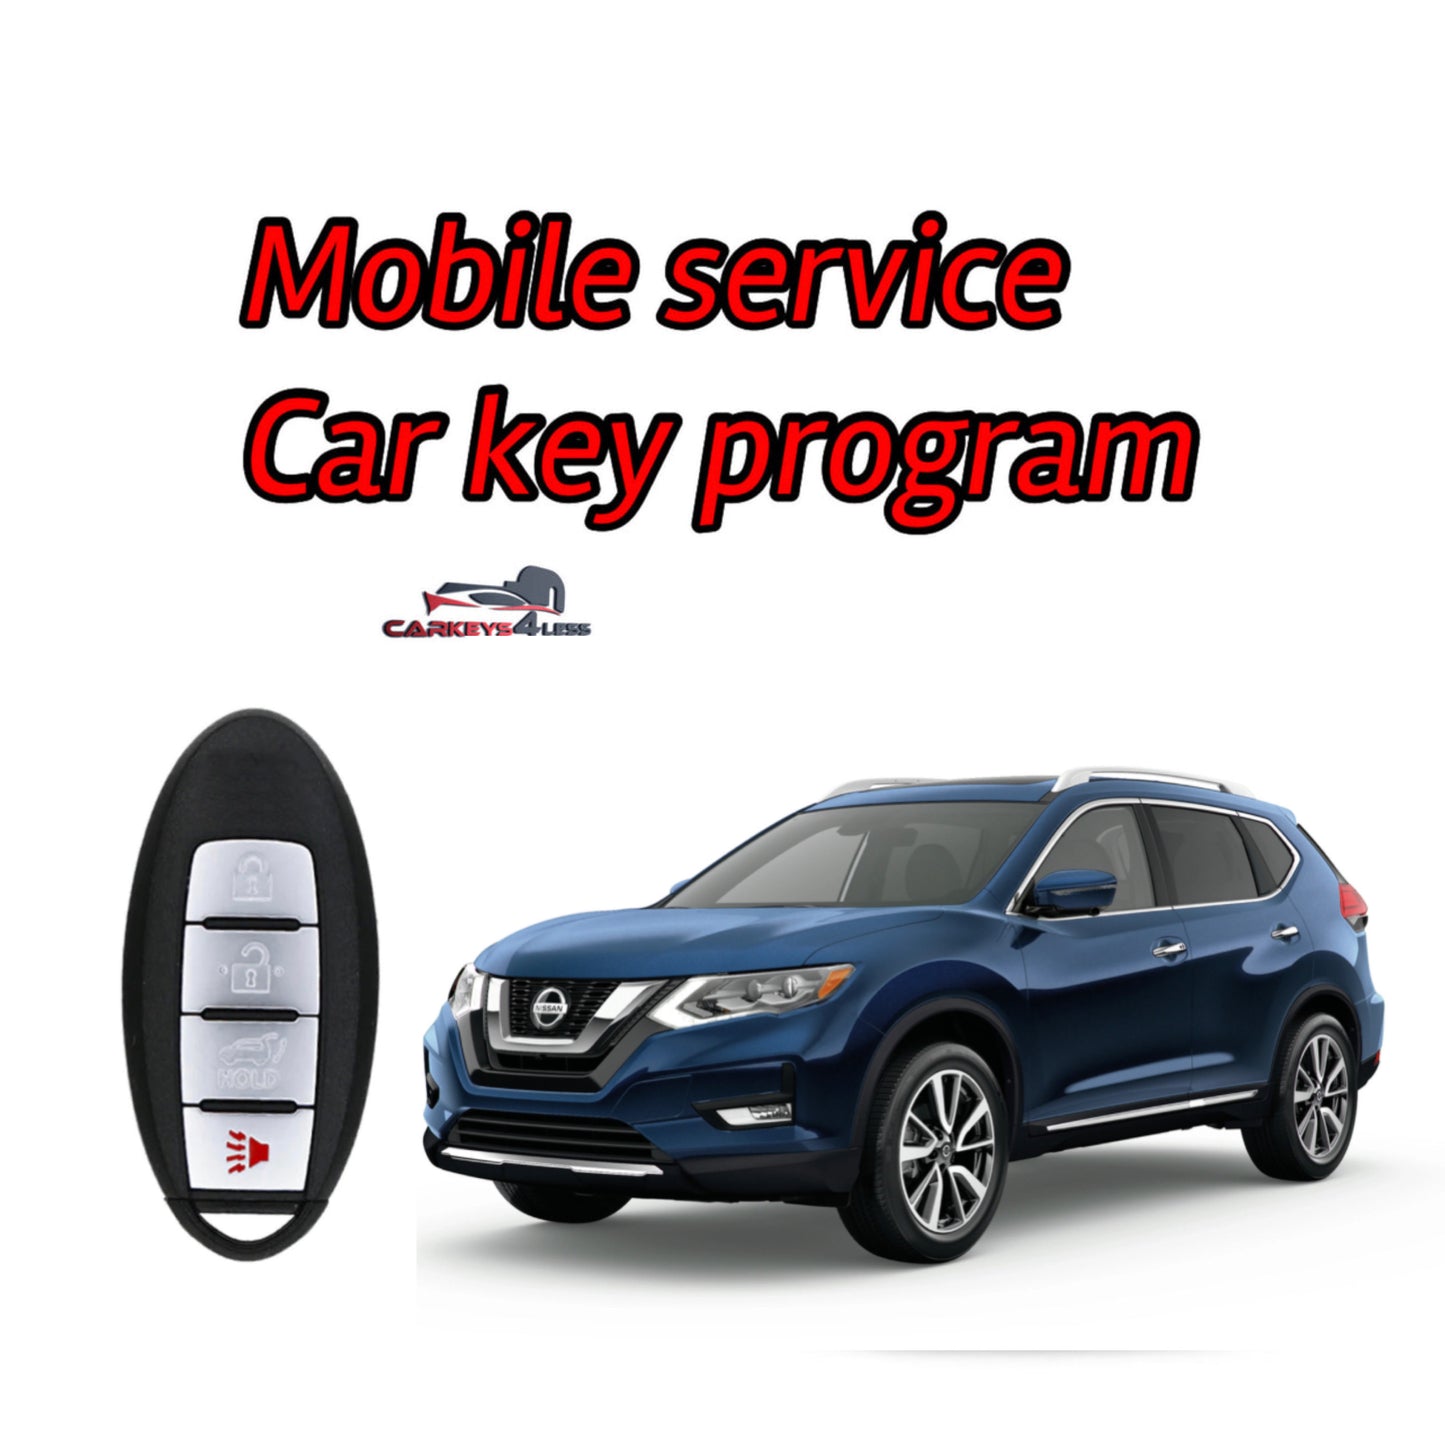 Mobile service for an aftermarket nissan car key replacement